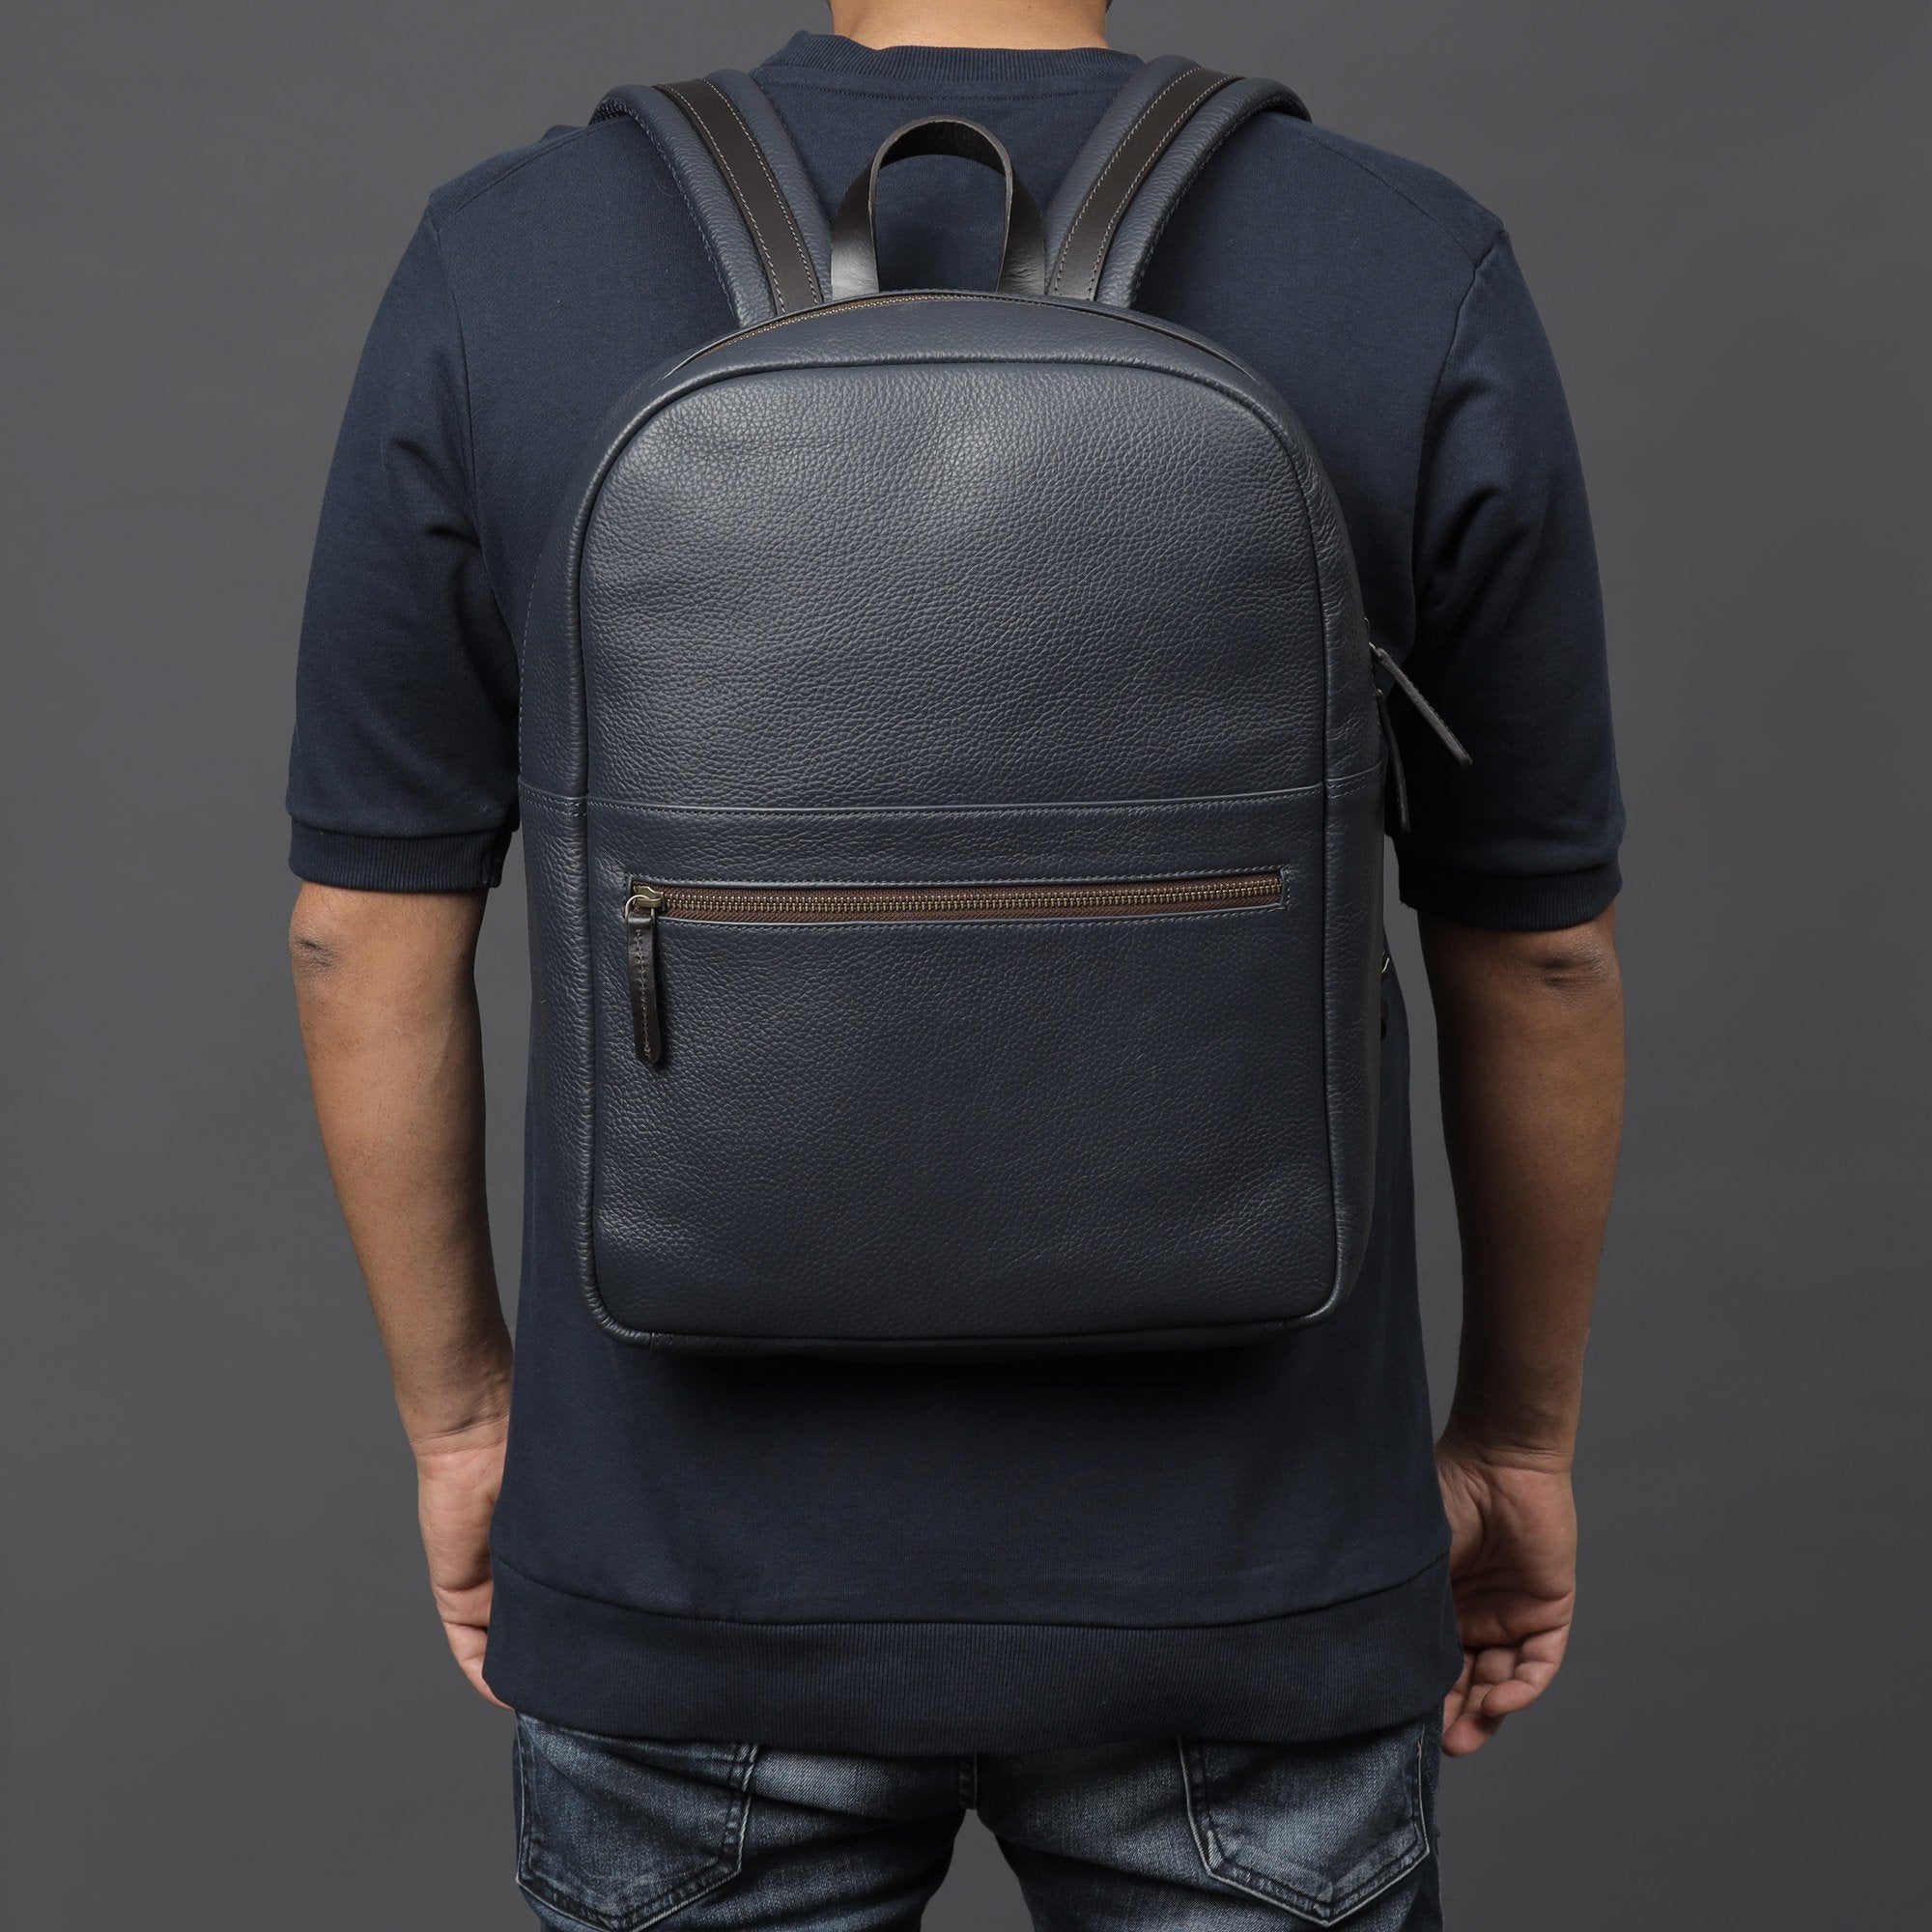 navy leather travel backpack